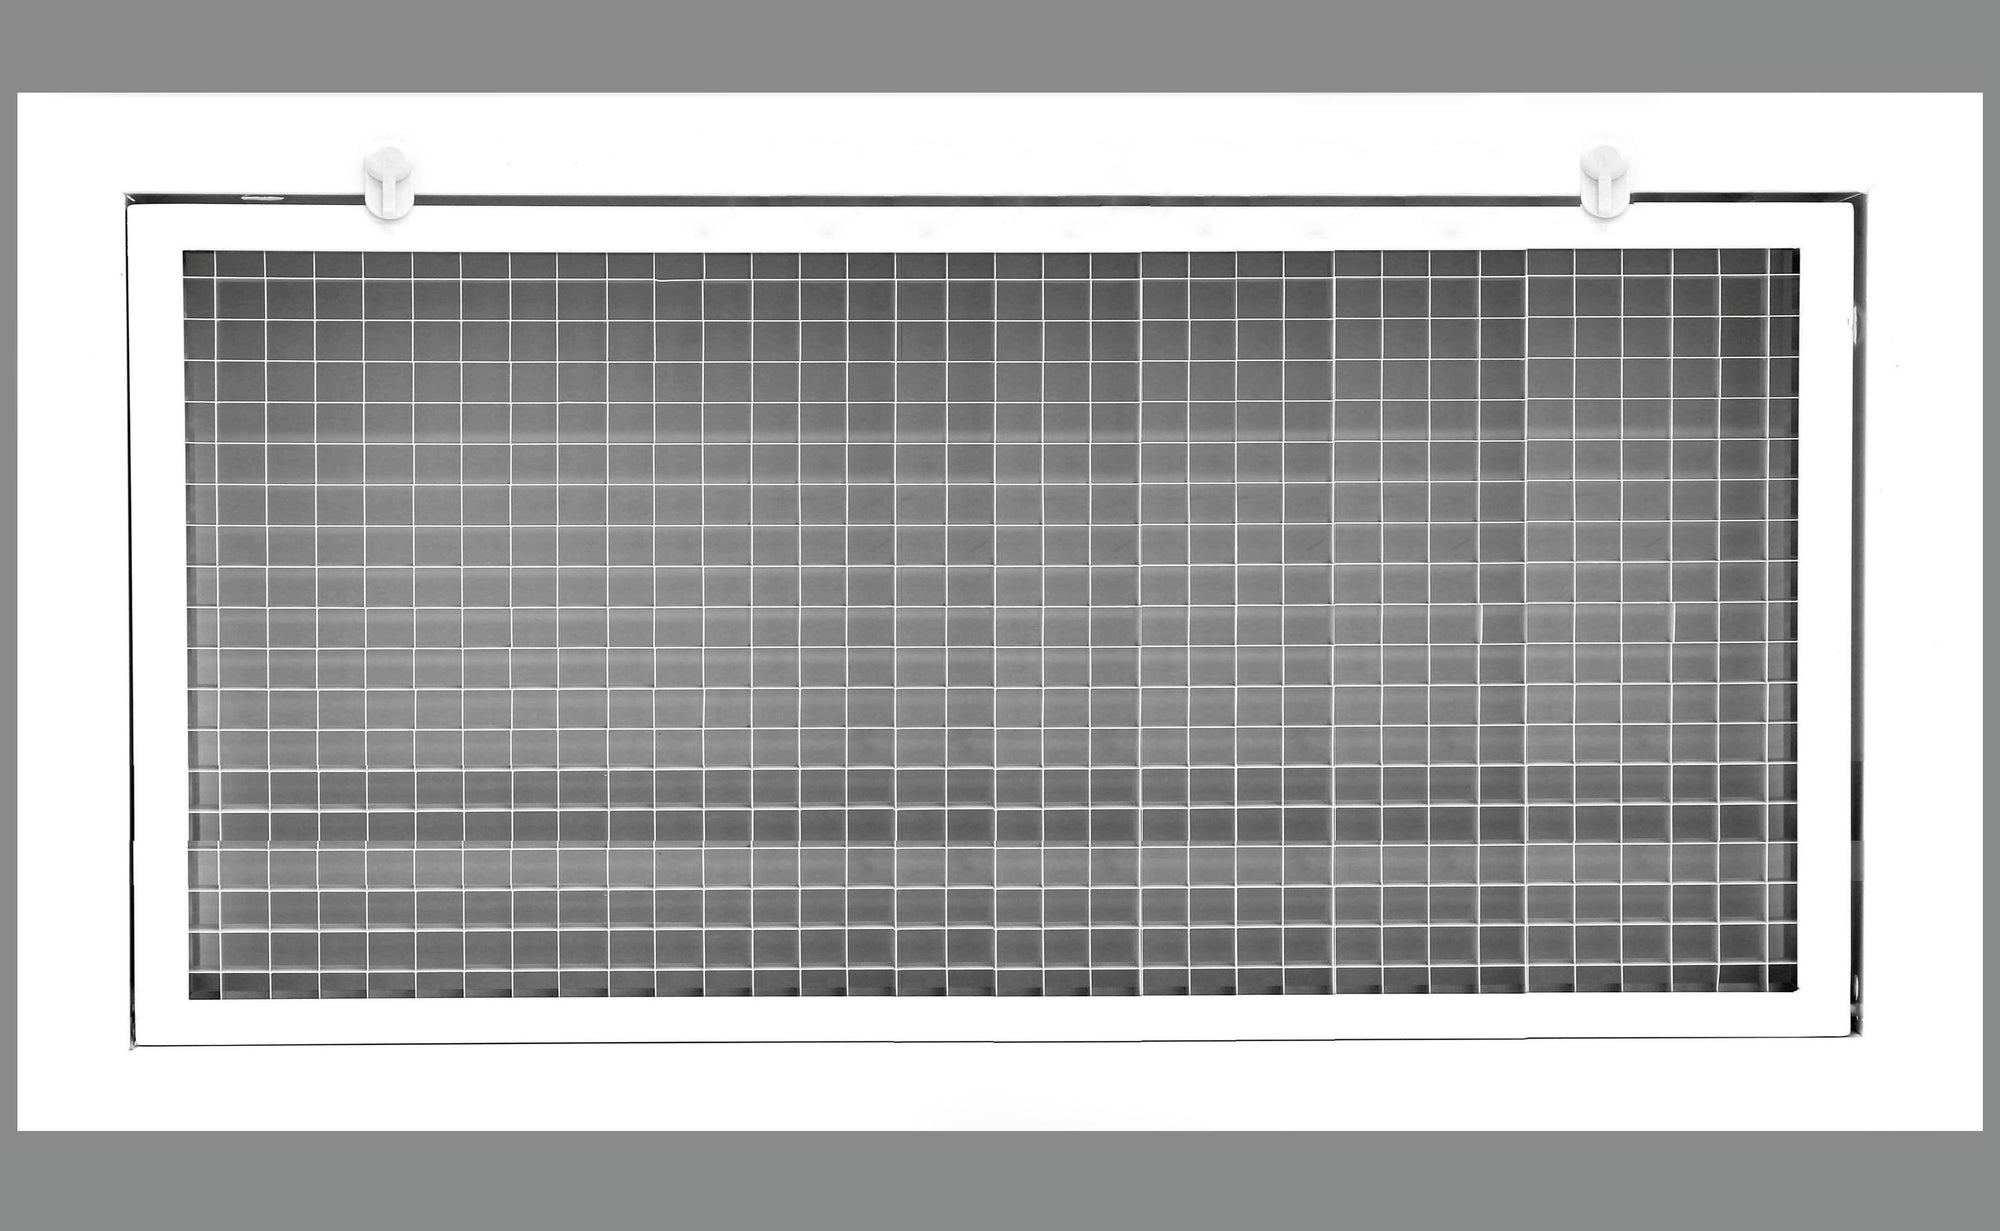 32" x 16" Cube Core Eggcrate Return Air Filter Grille for 1" Filter